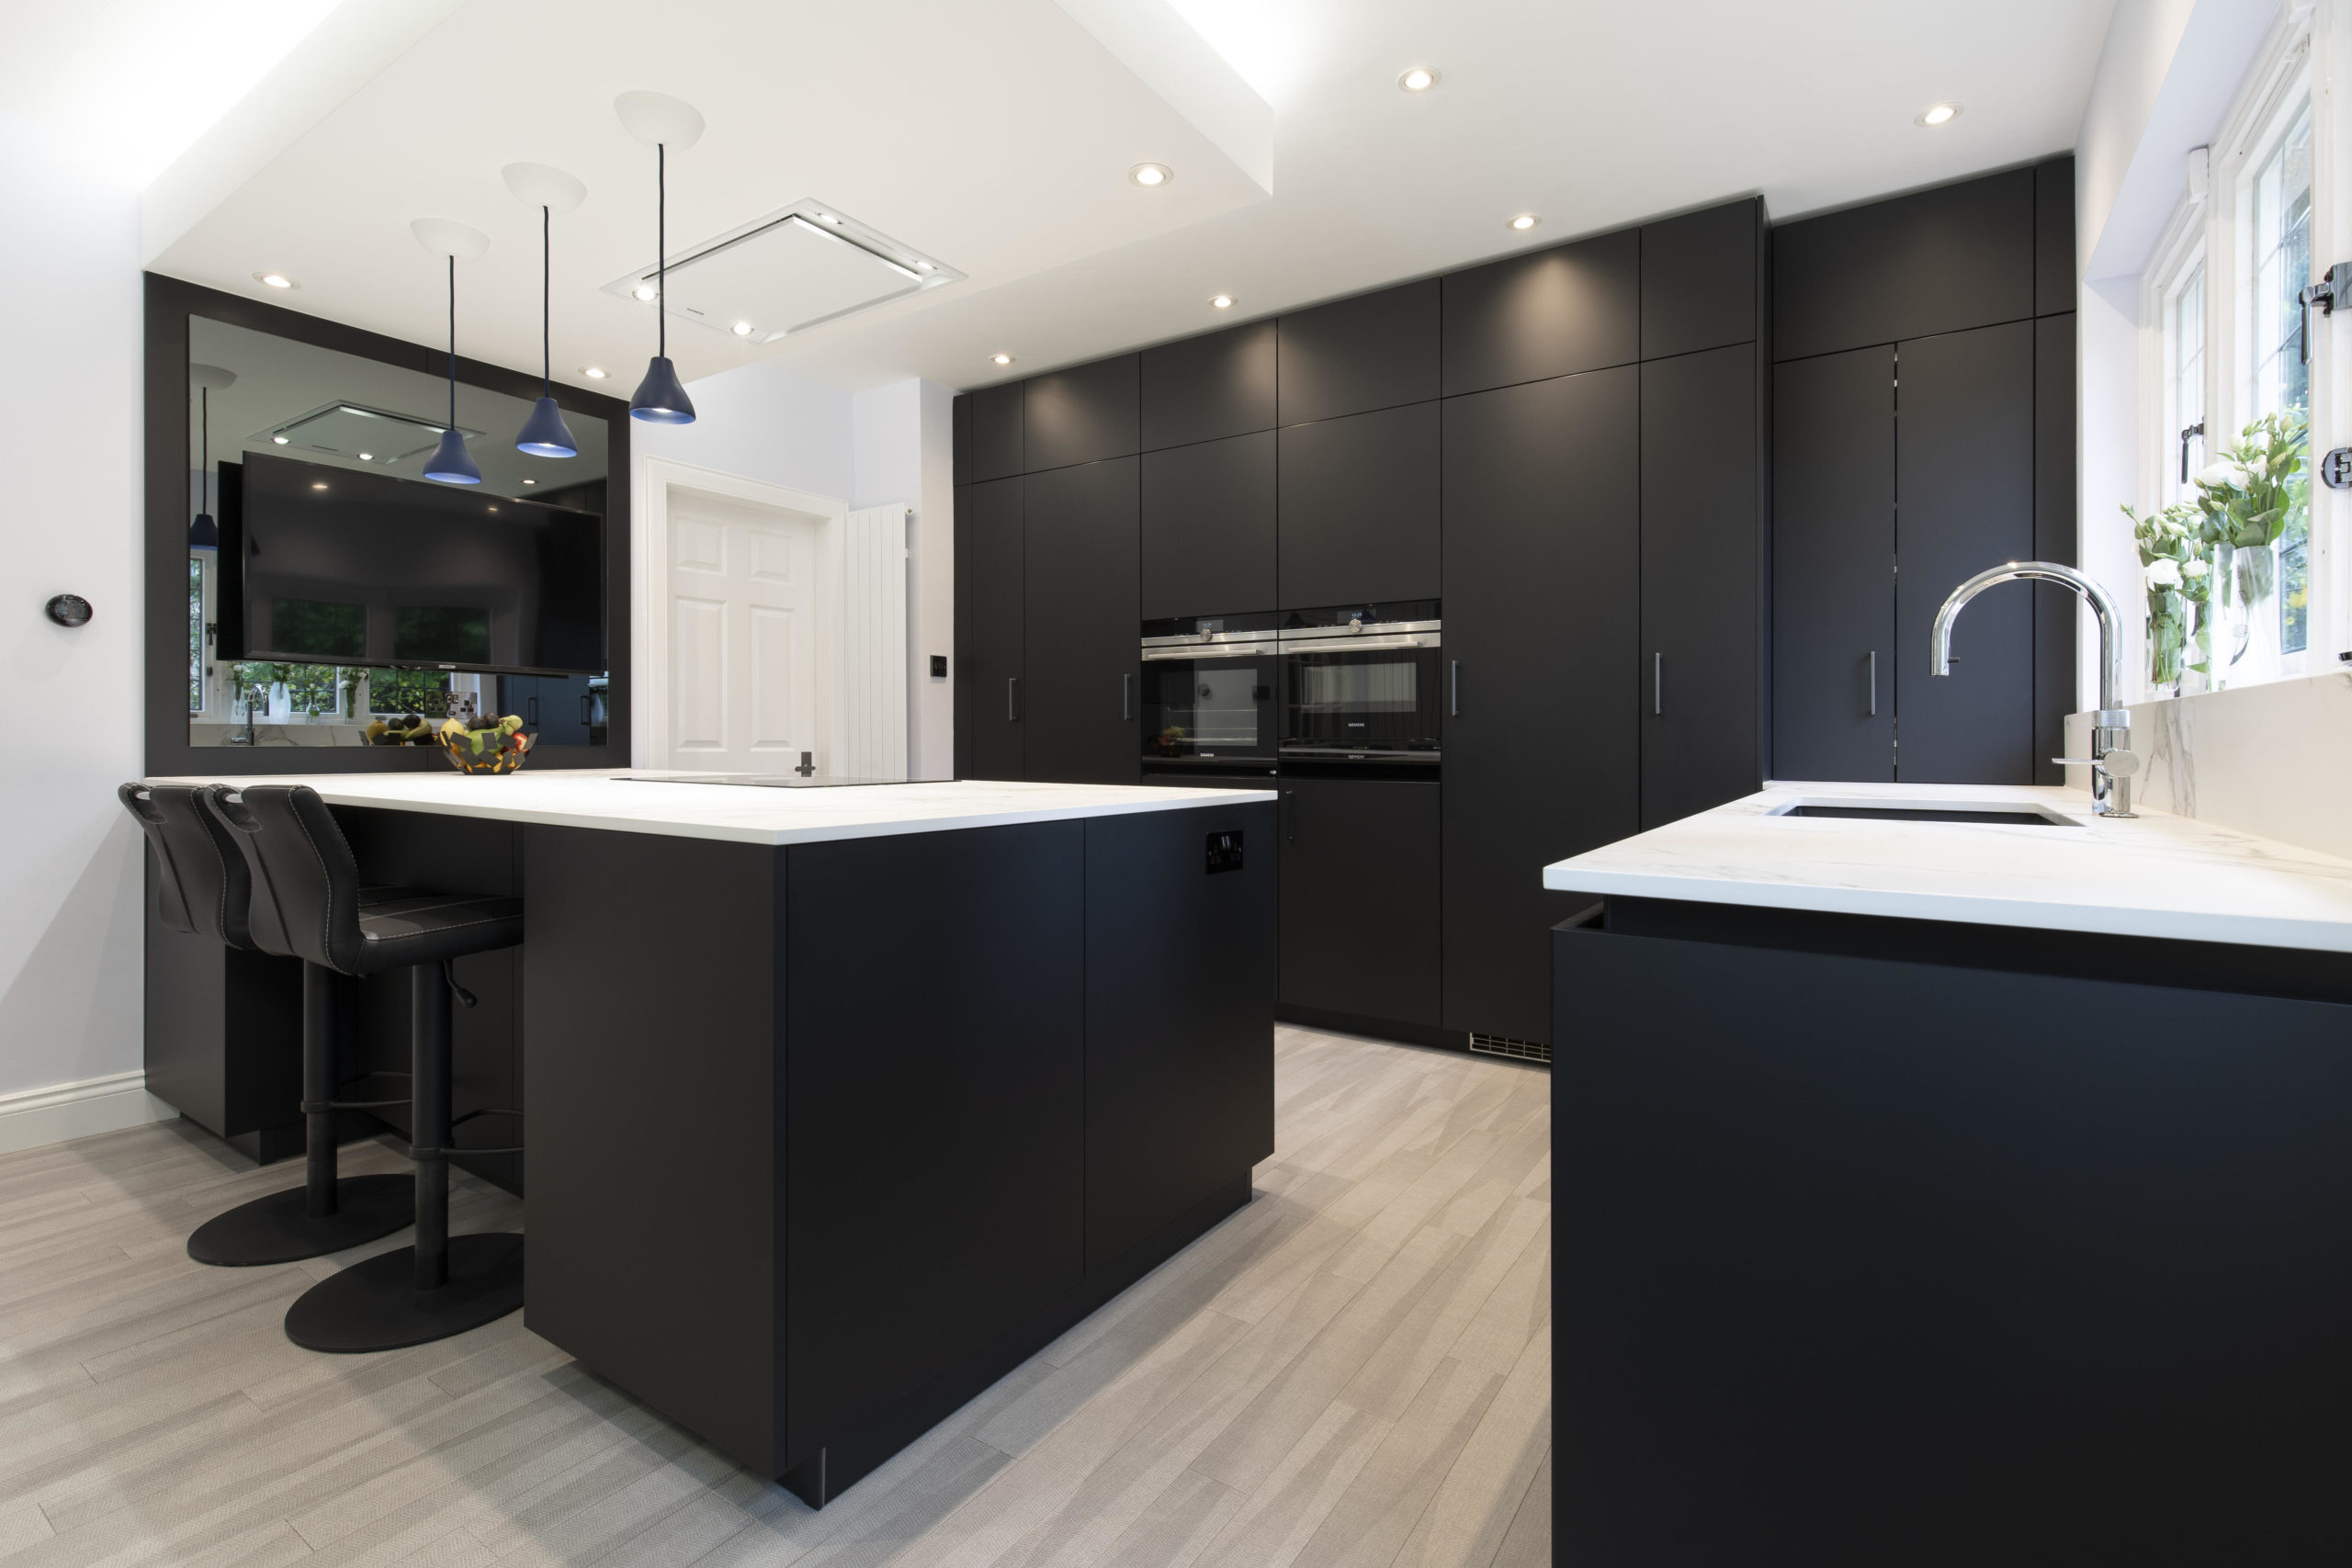 A modern kitchen with white countertops and black cupboards and walls